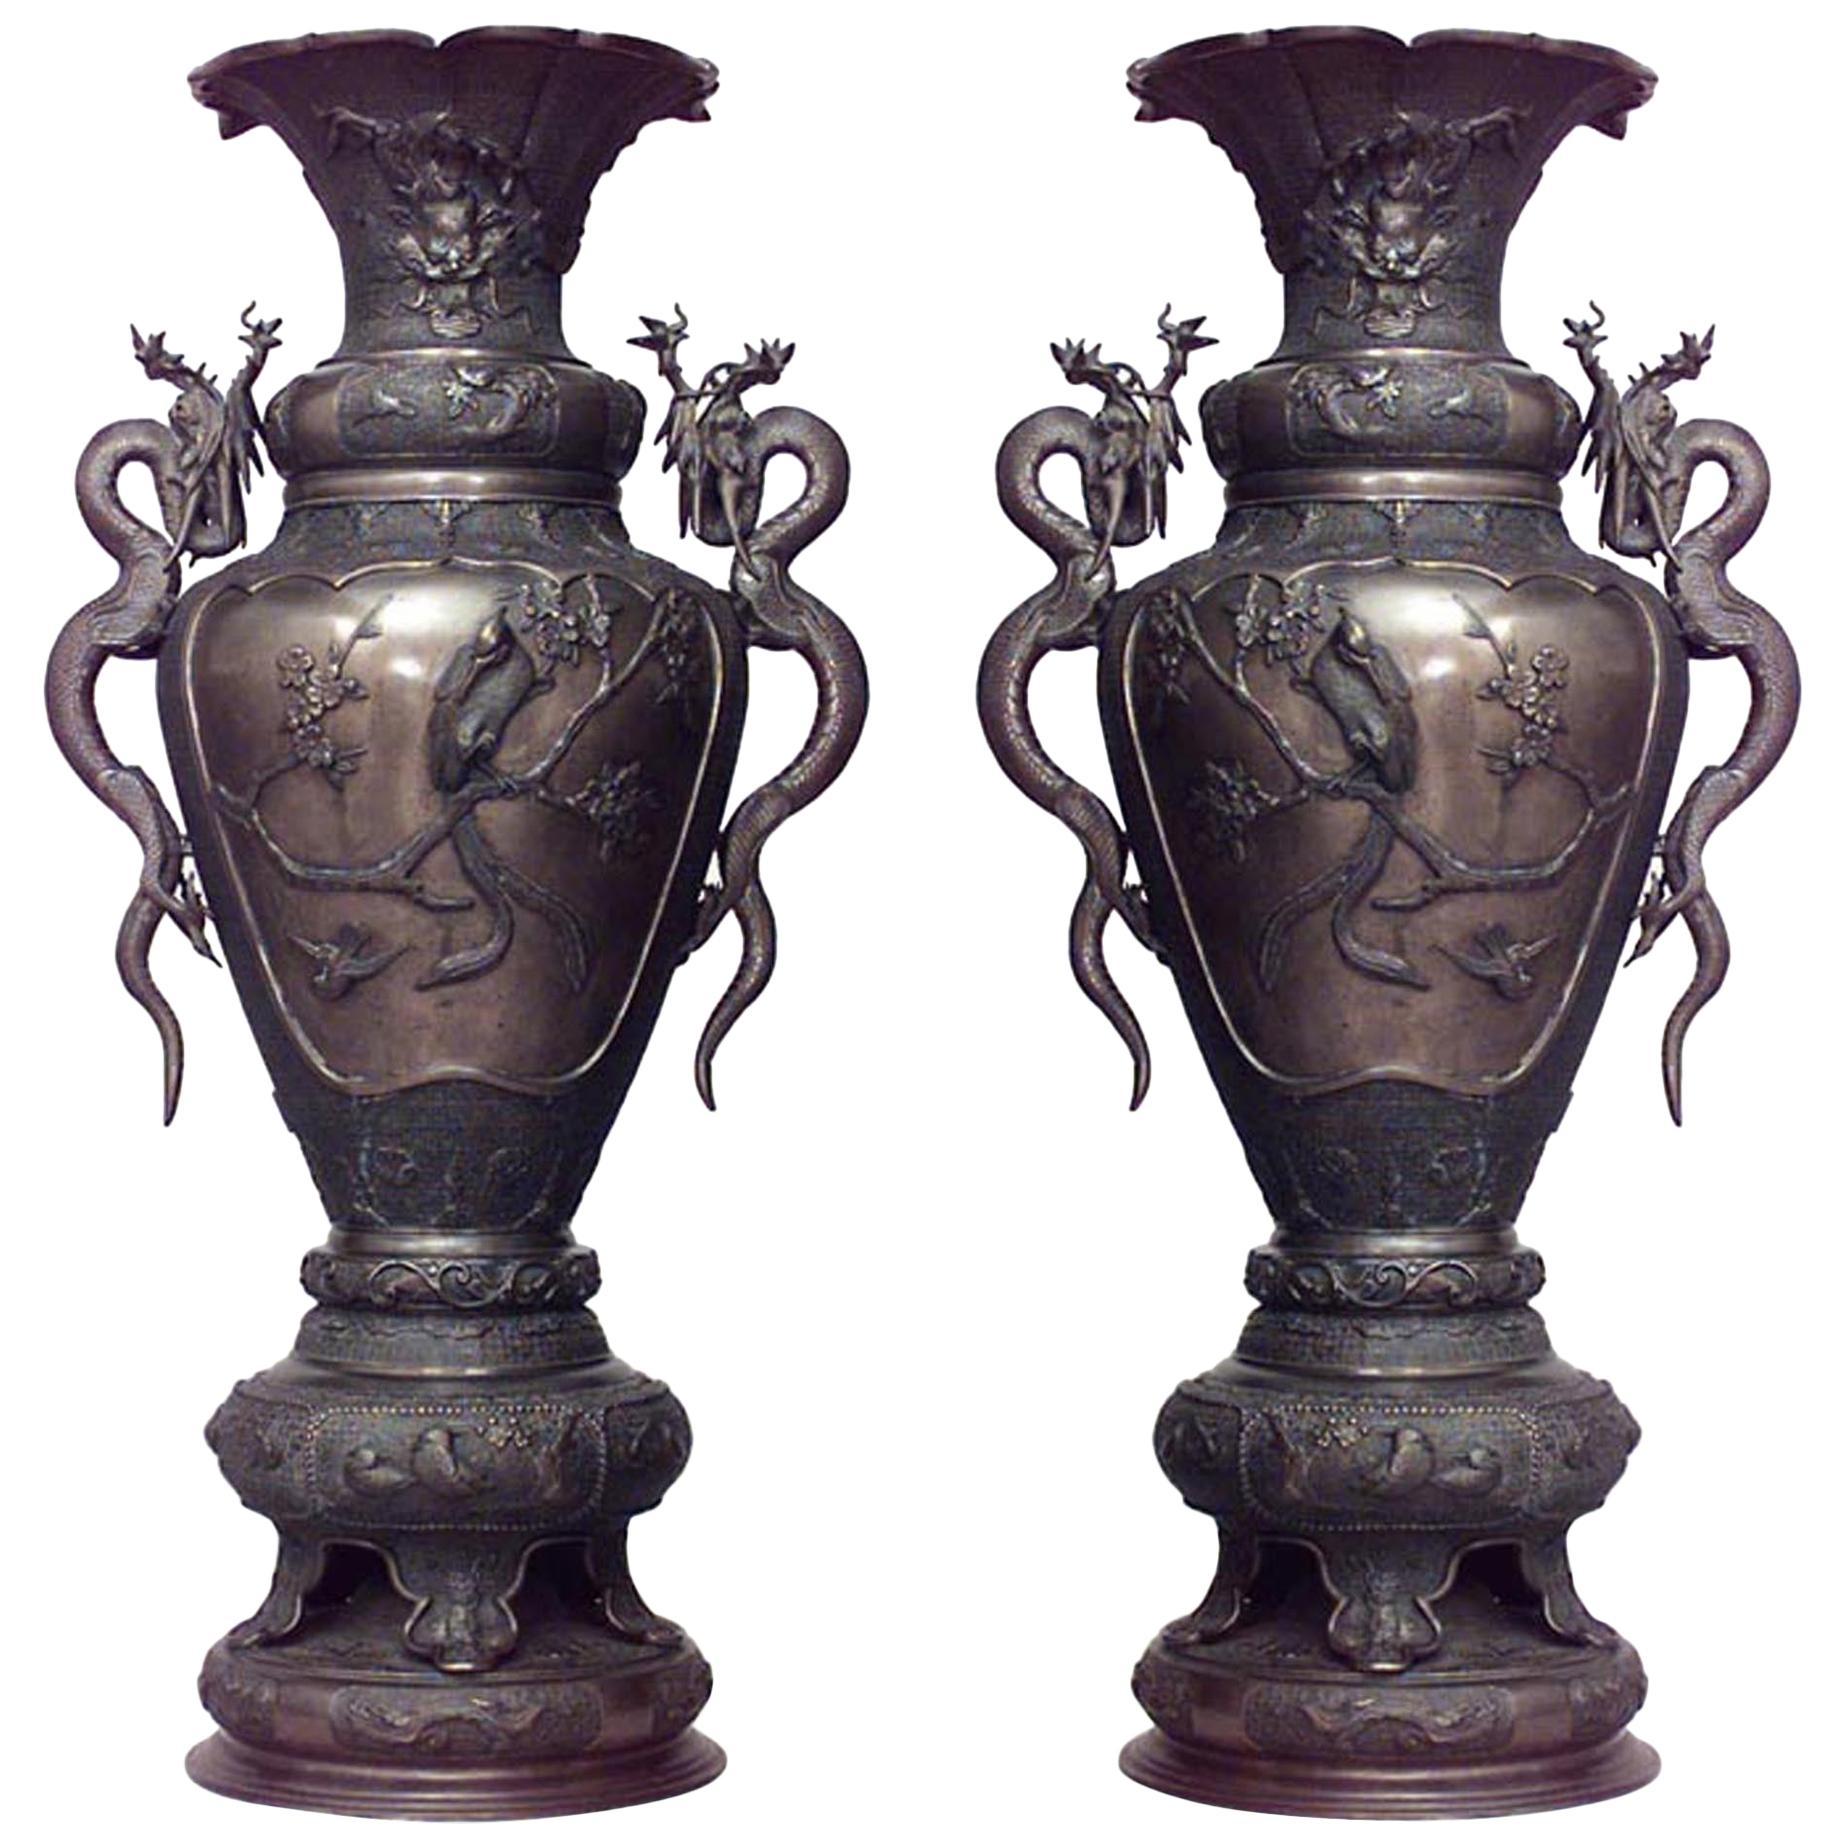 Pair of Japanese Style Bronze Palace Urns